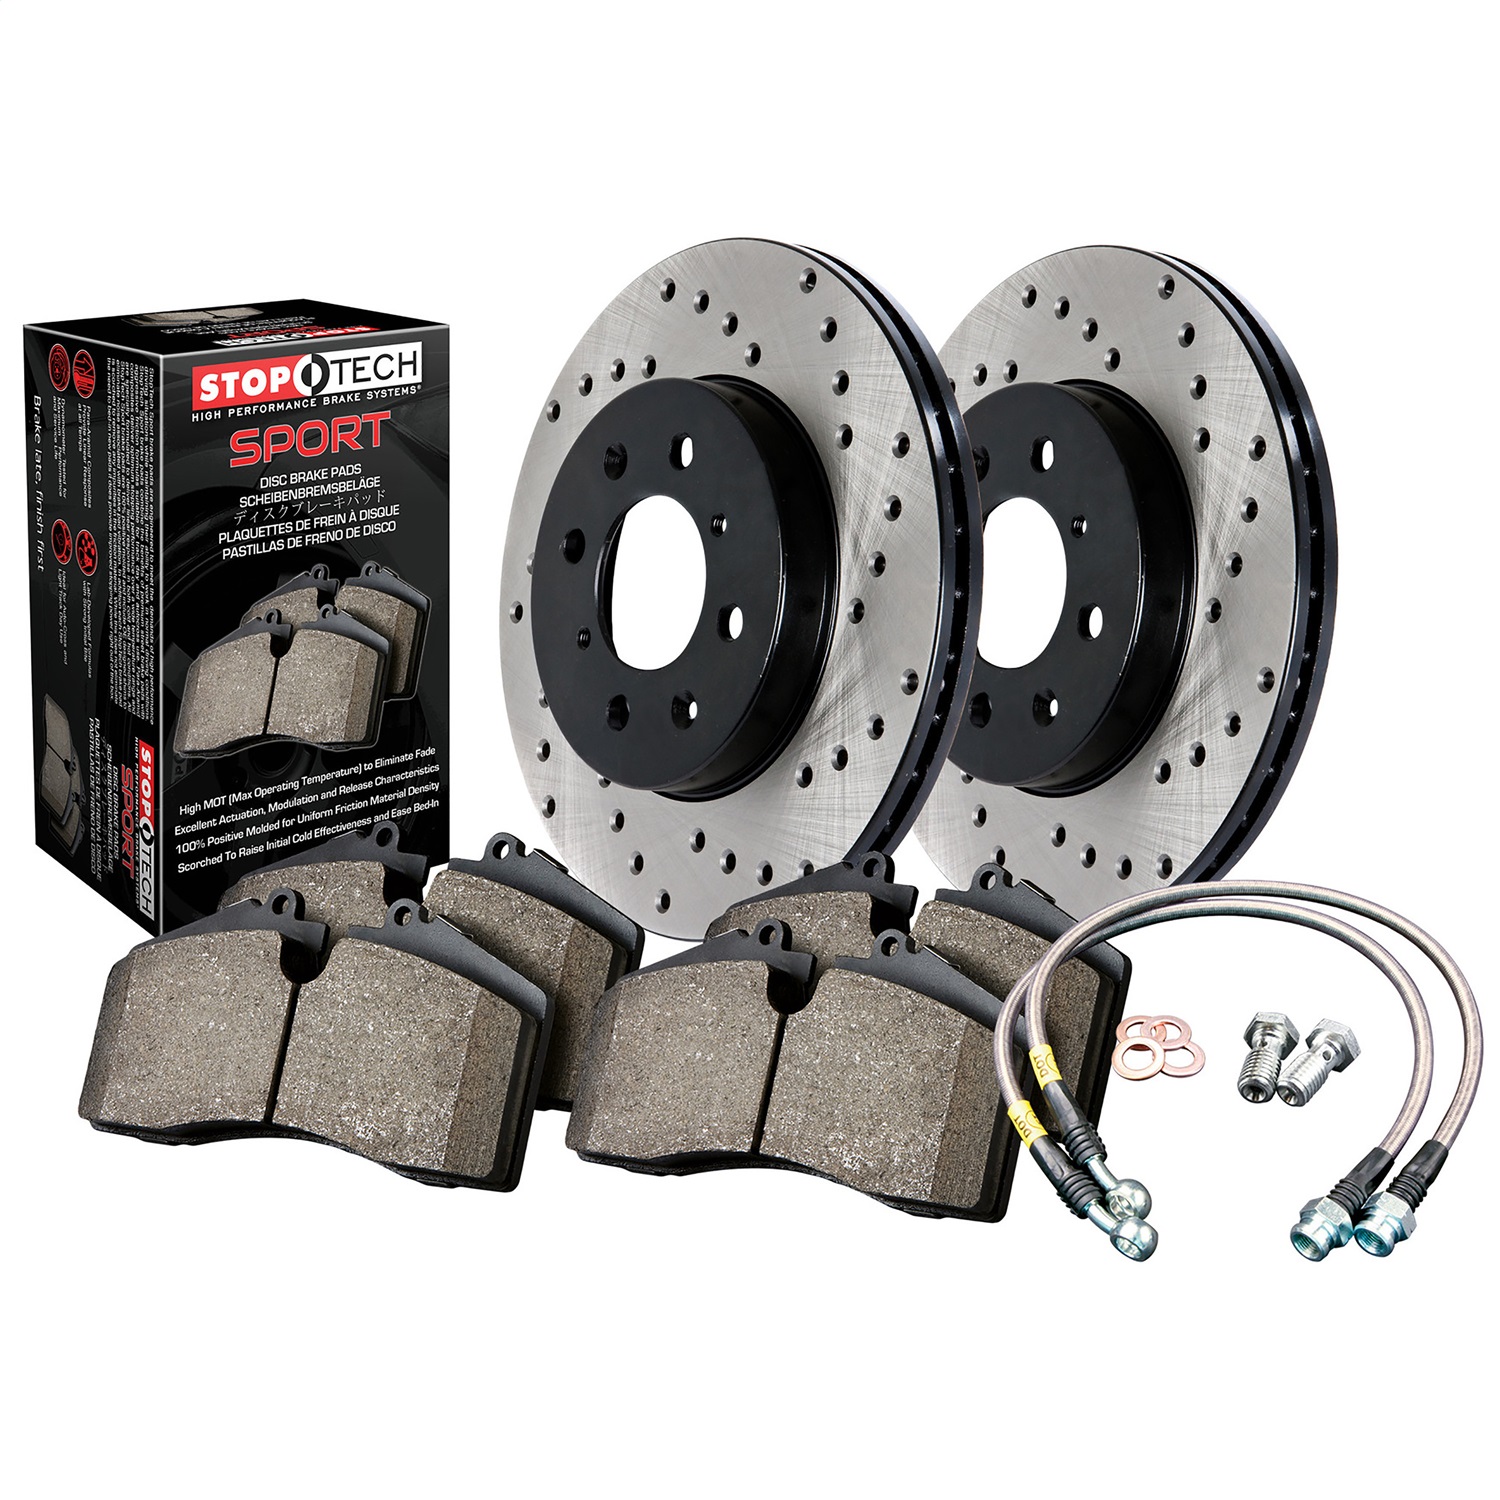 StopTech 979.33080F Sport Disc Brake Kit w/Cross-Drilled Rotors Fits 11-19 S4 S5